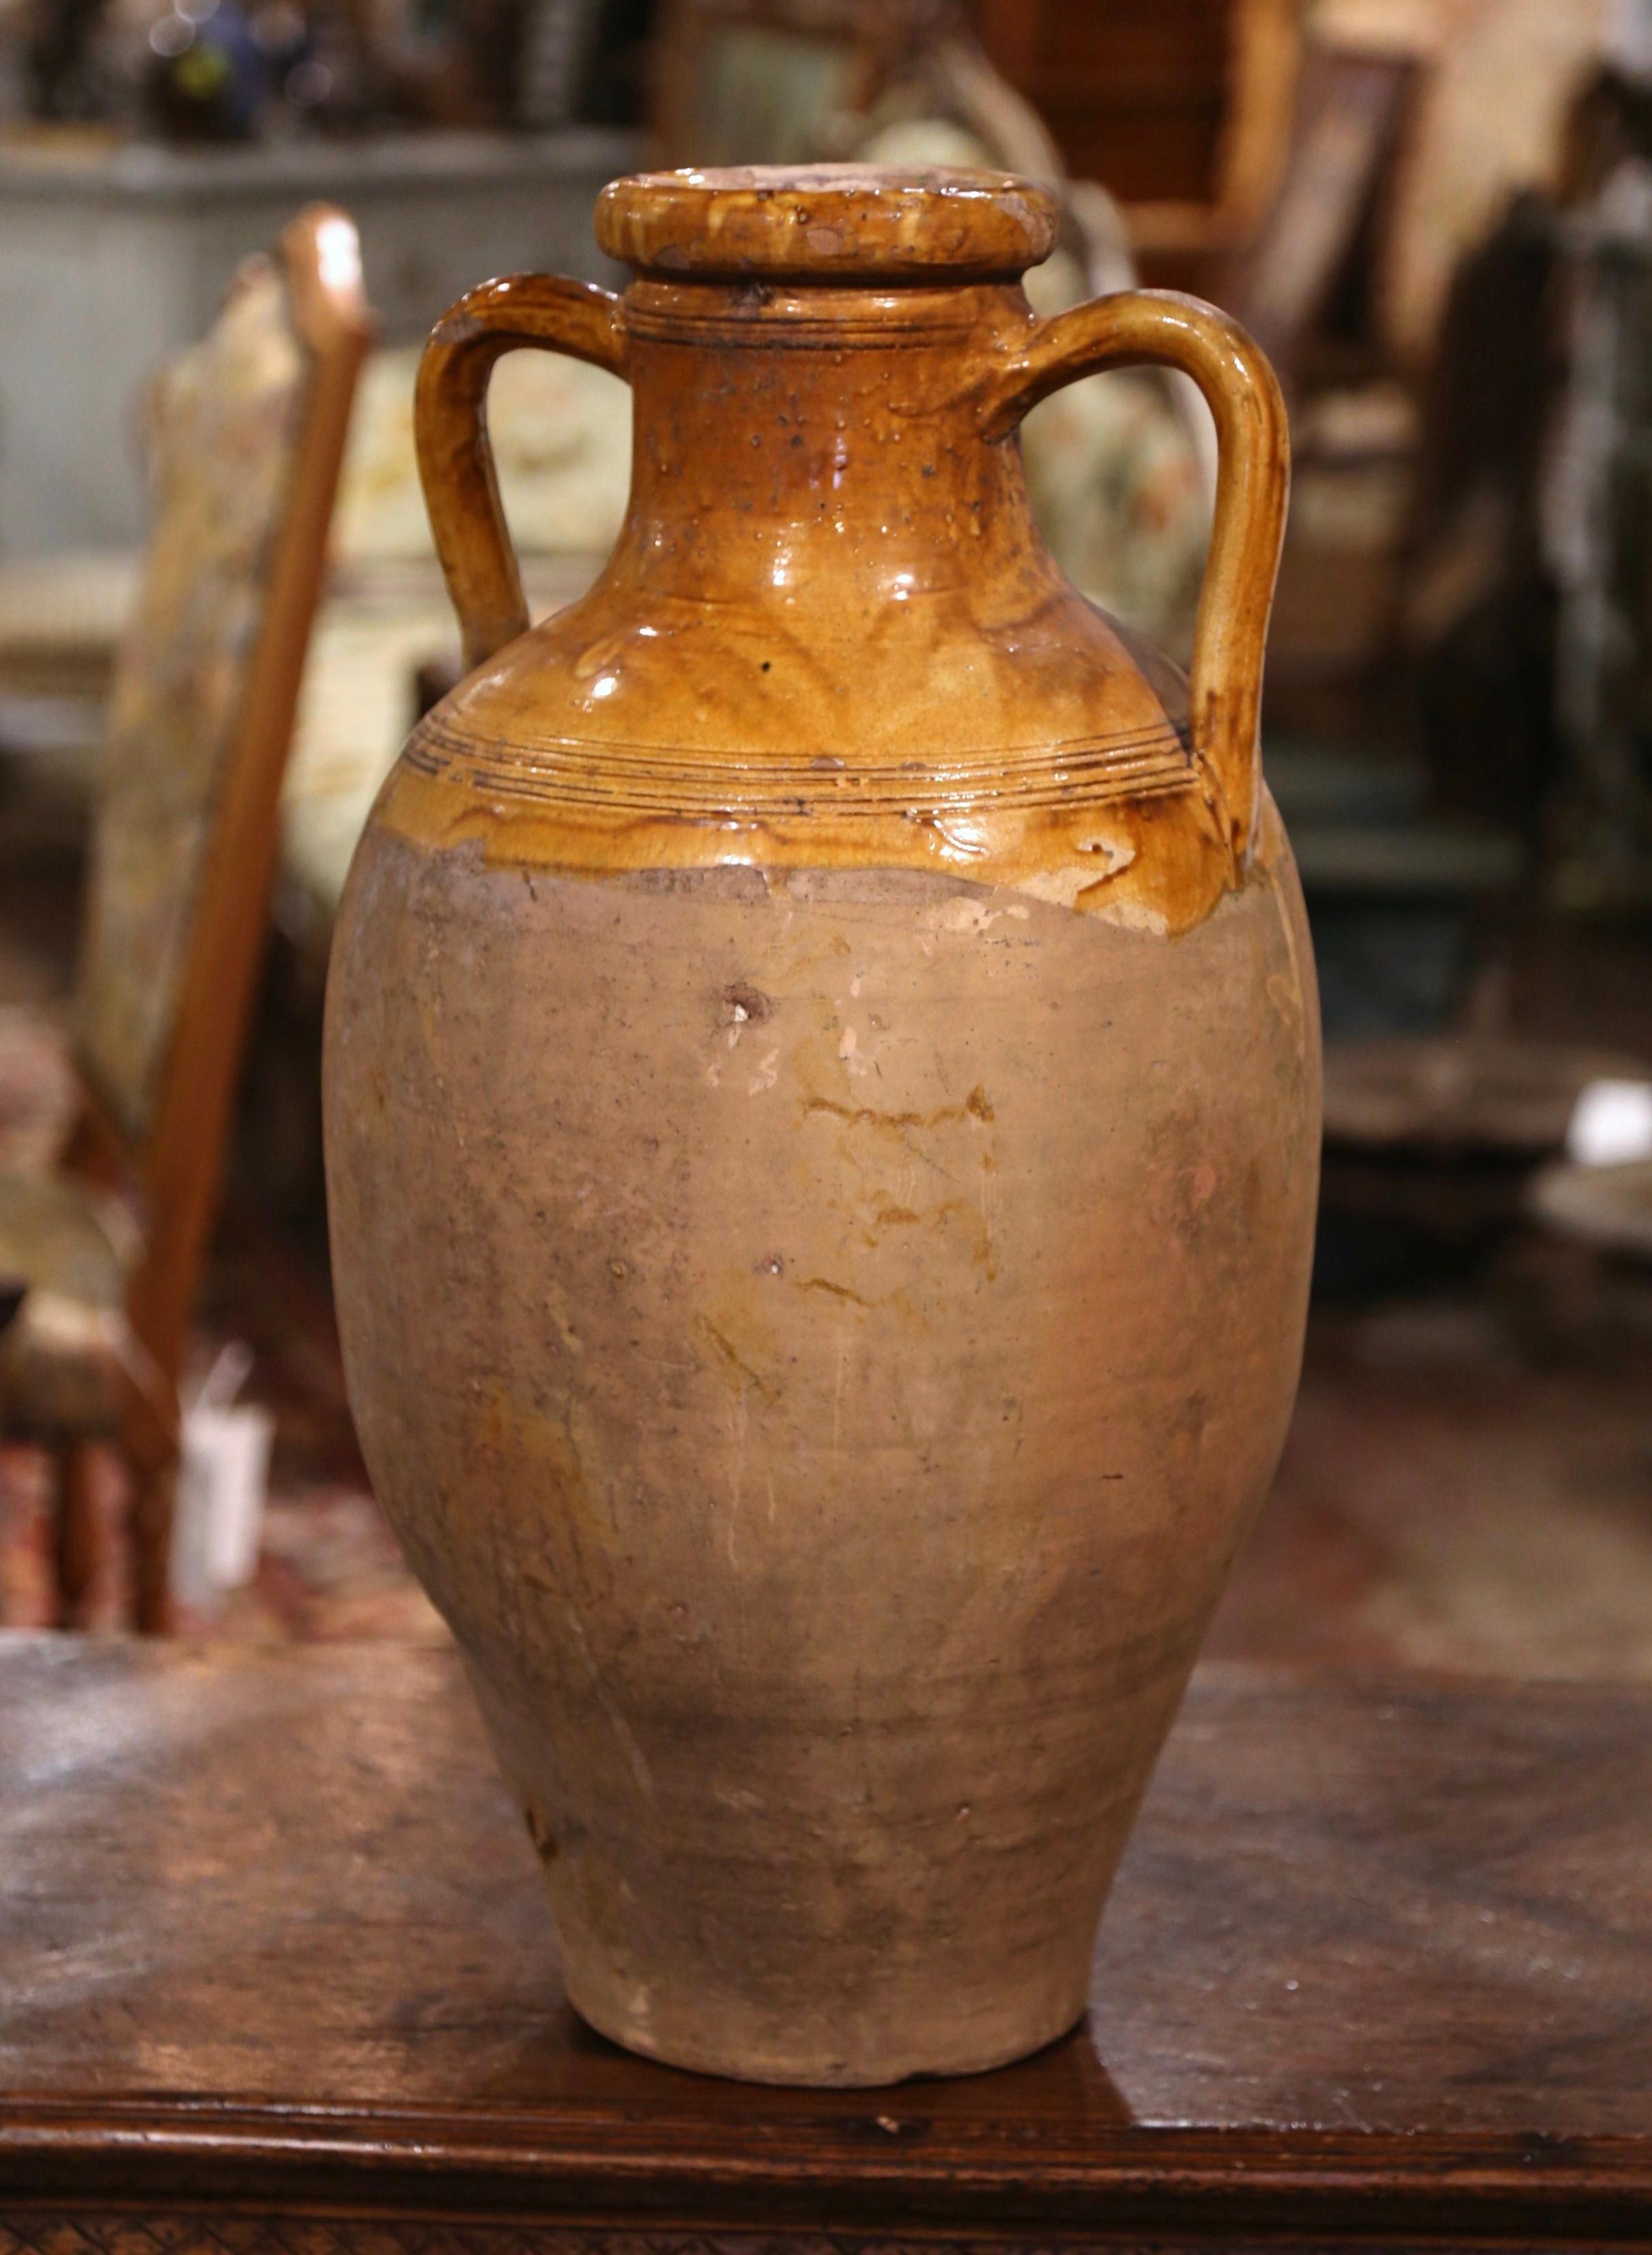 This large antique earthenware olive oil urn was created in Southern France, circa 1880. Made of blond clay and neutral in color, the terracotta vase has a traditional round shape decorated with side handles. The rustic, time-worn pot features a